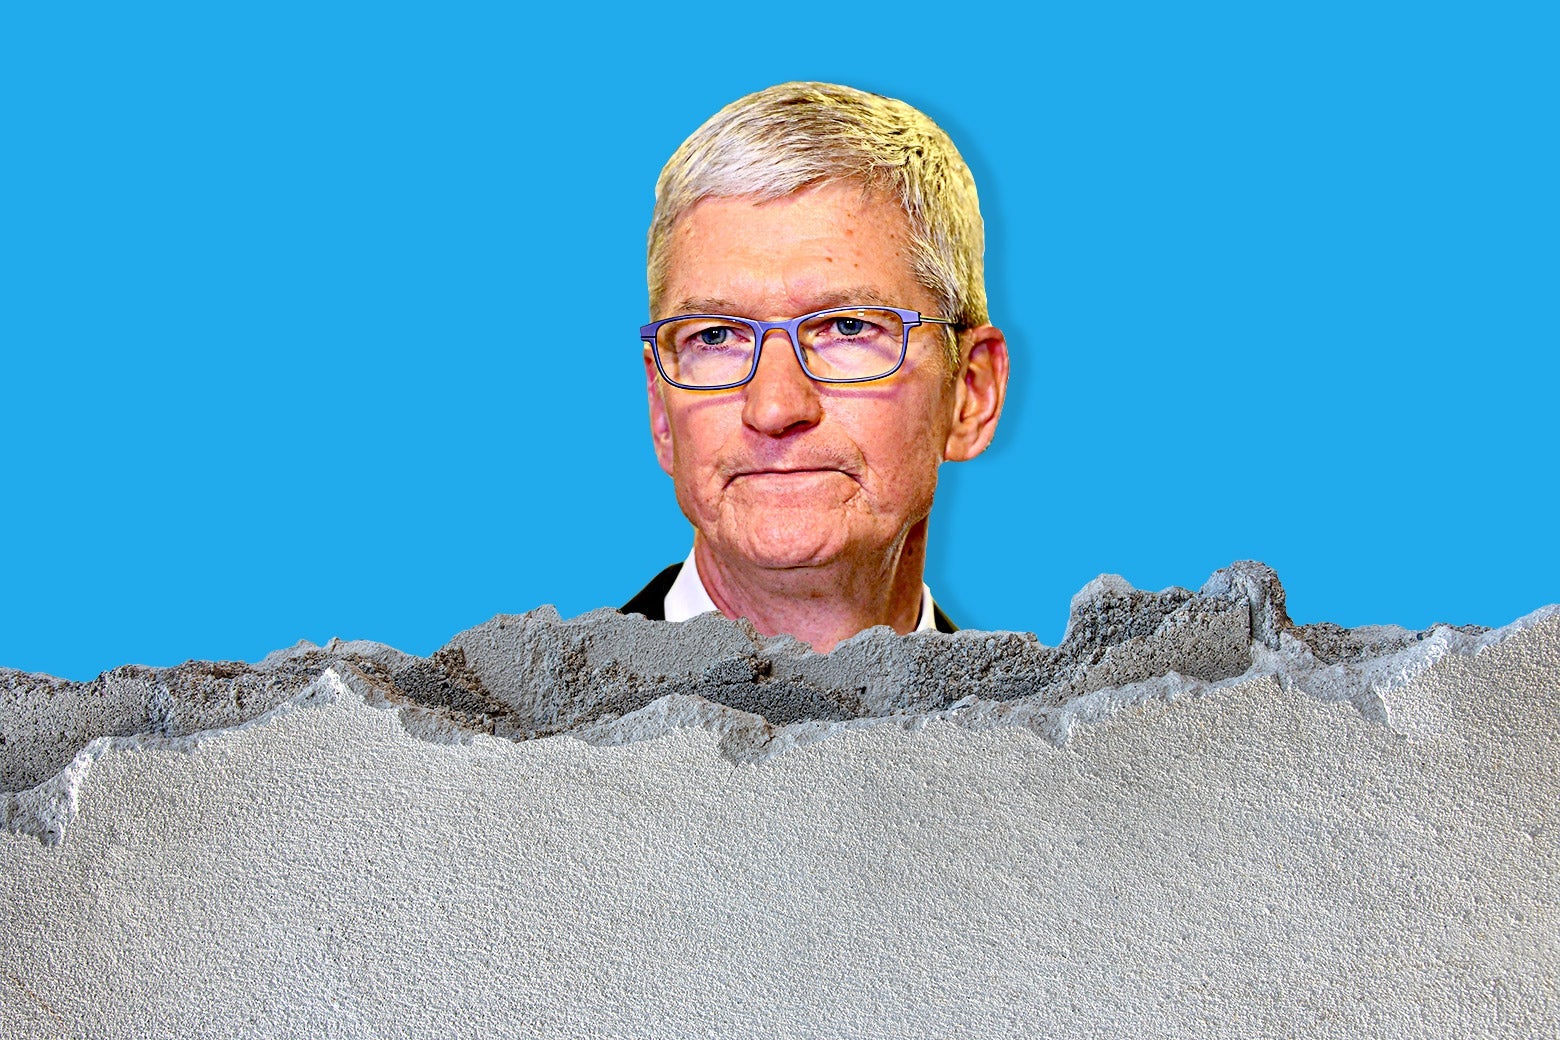 Tim Cook peering over a crumbling concrete wall.